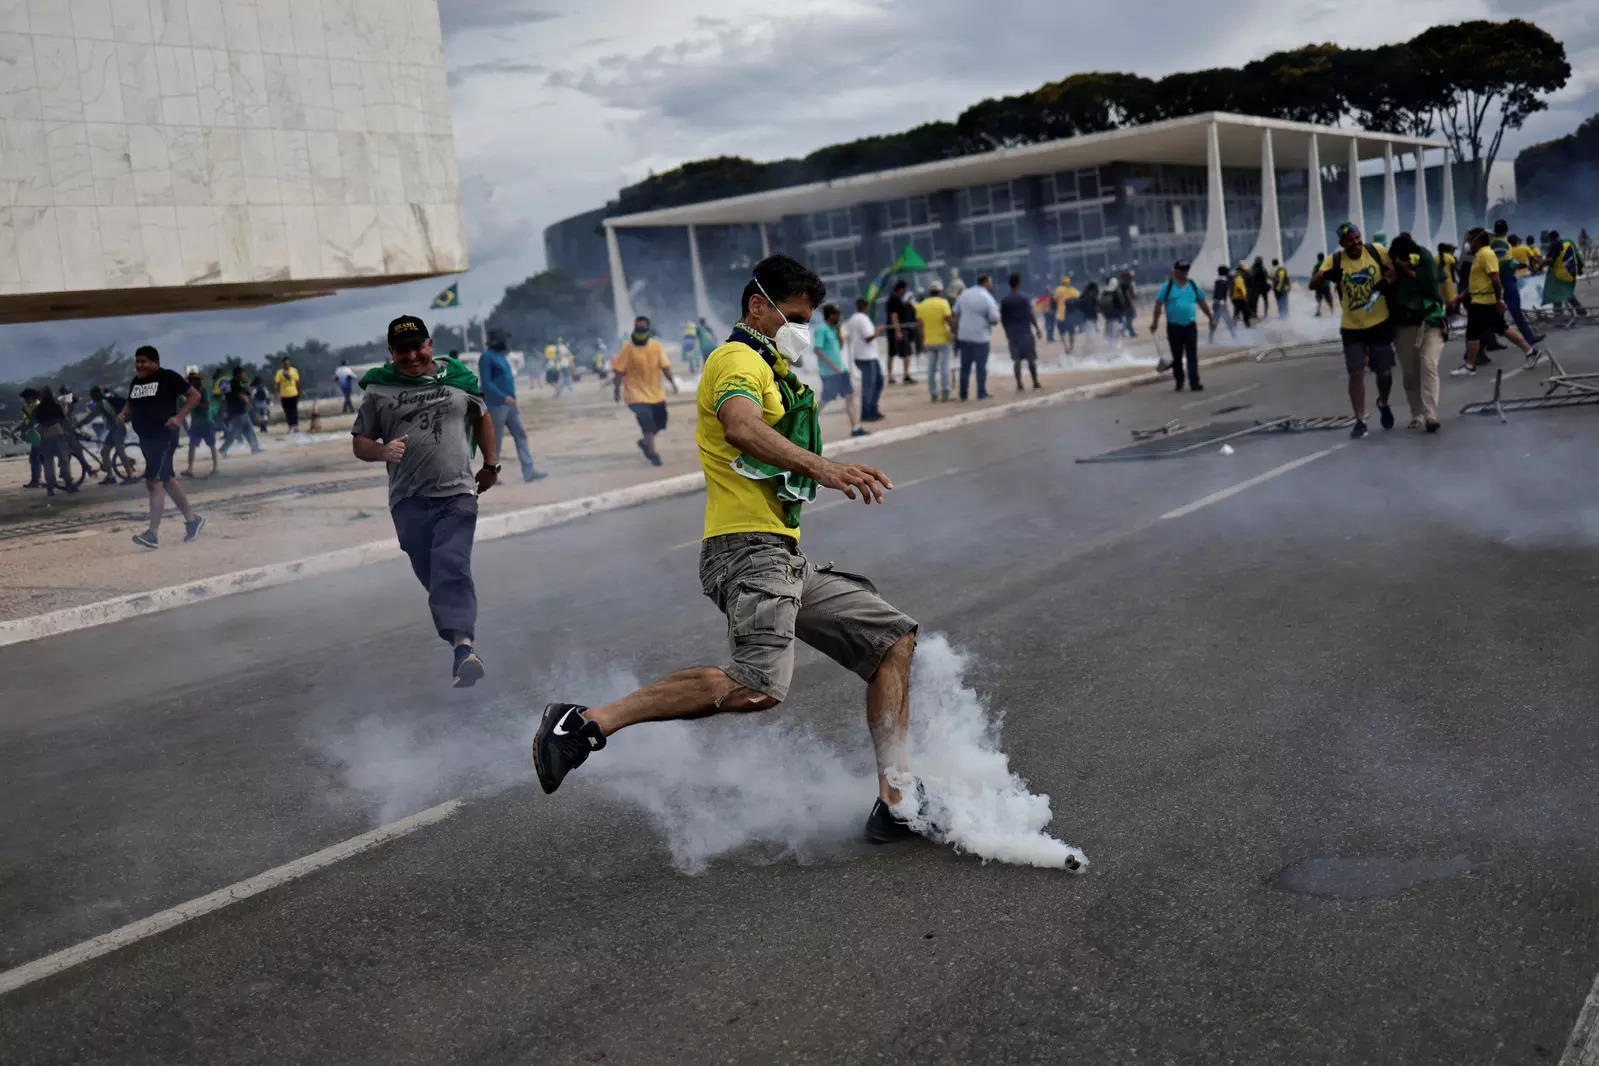 In Pictures: Bolsonaro supporters storm Brazilian government buildings